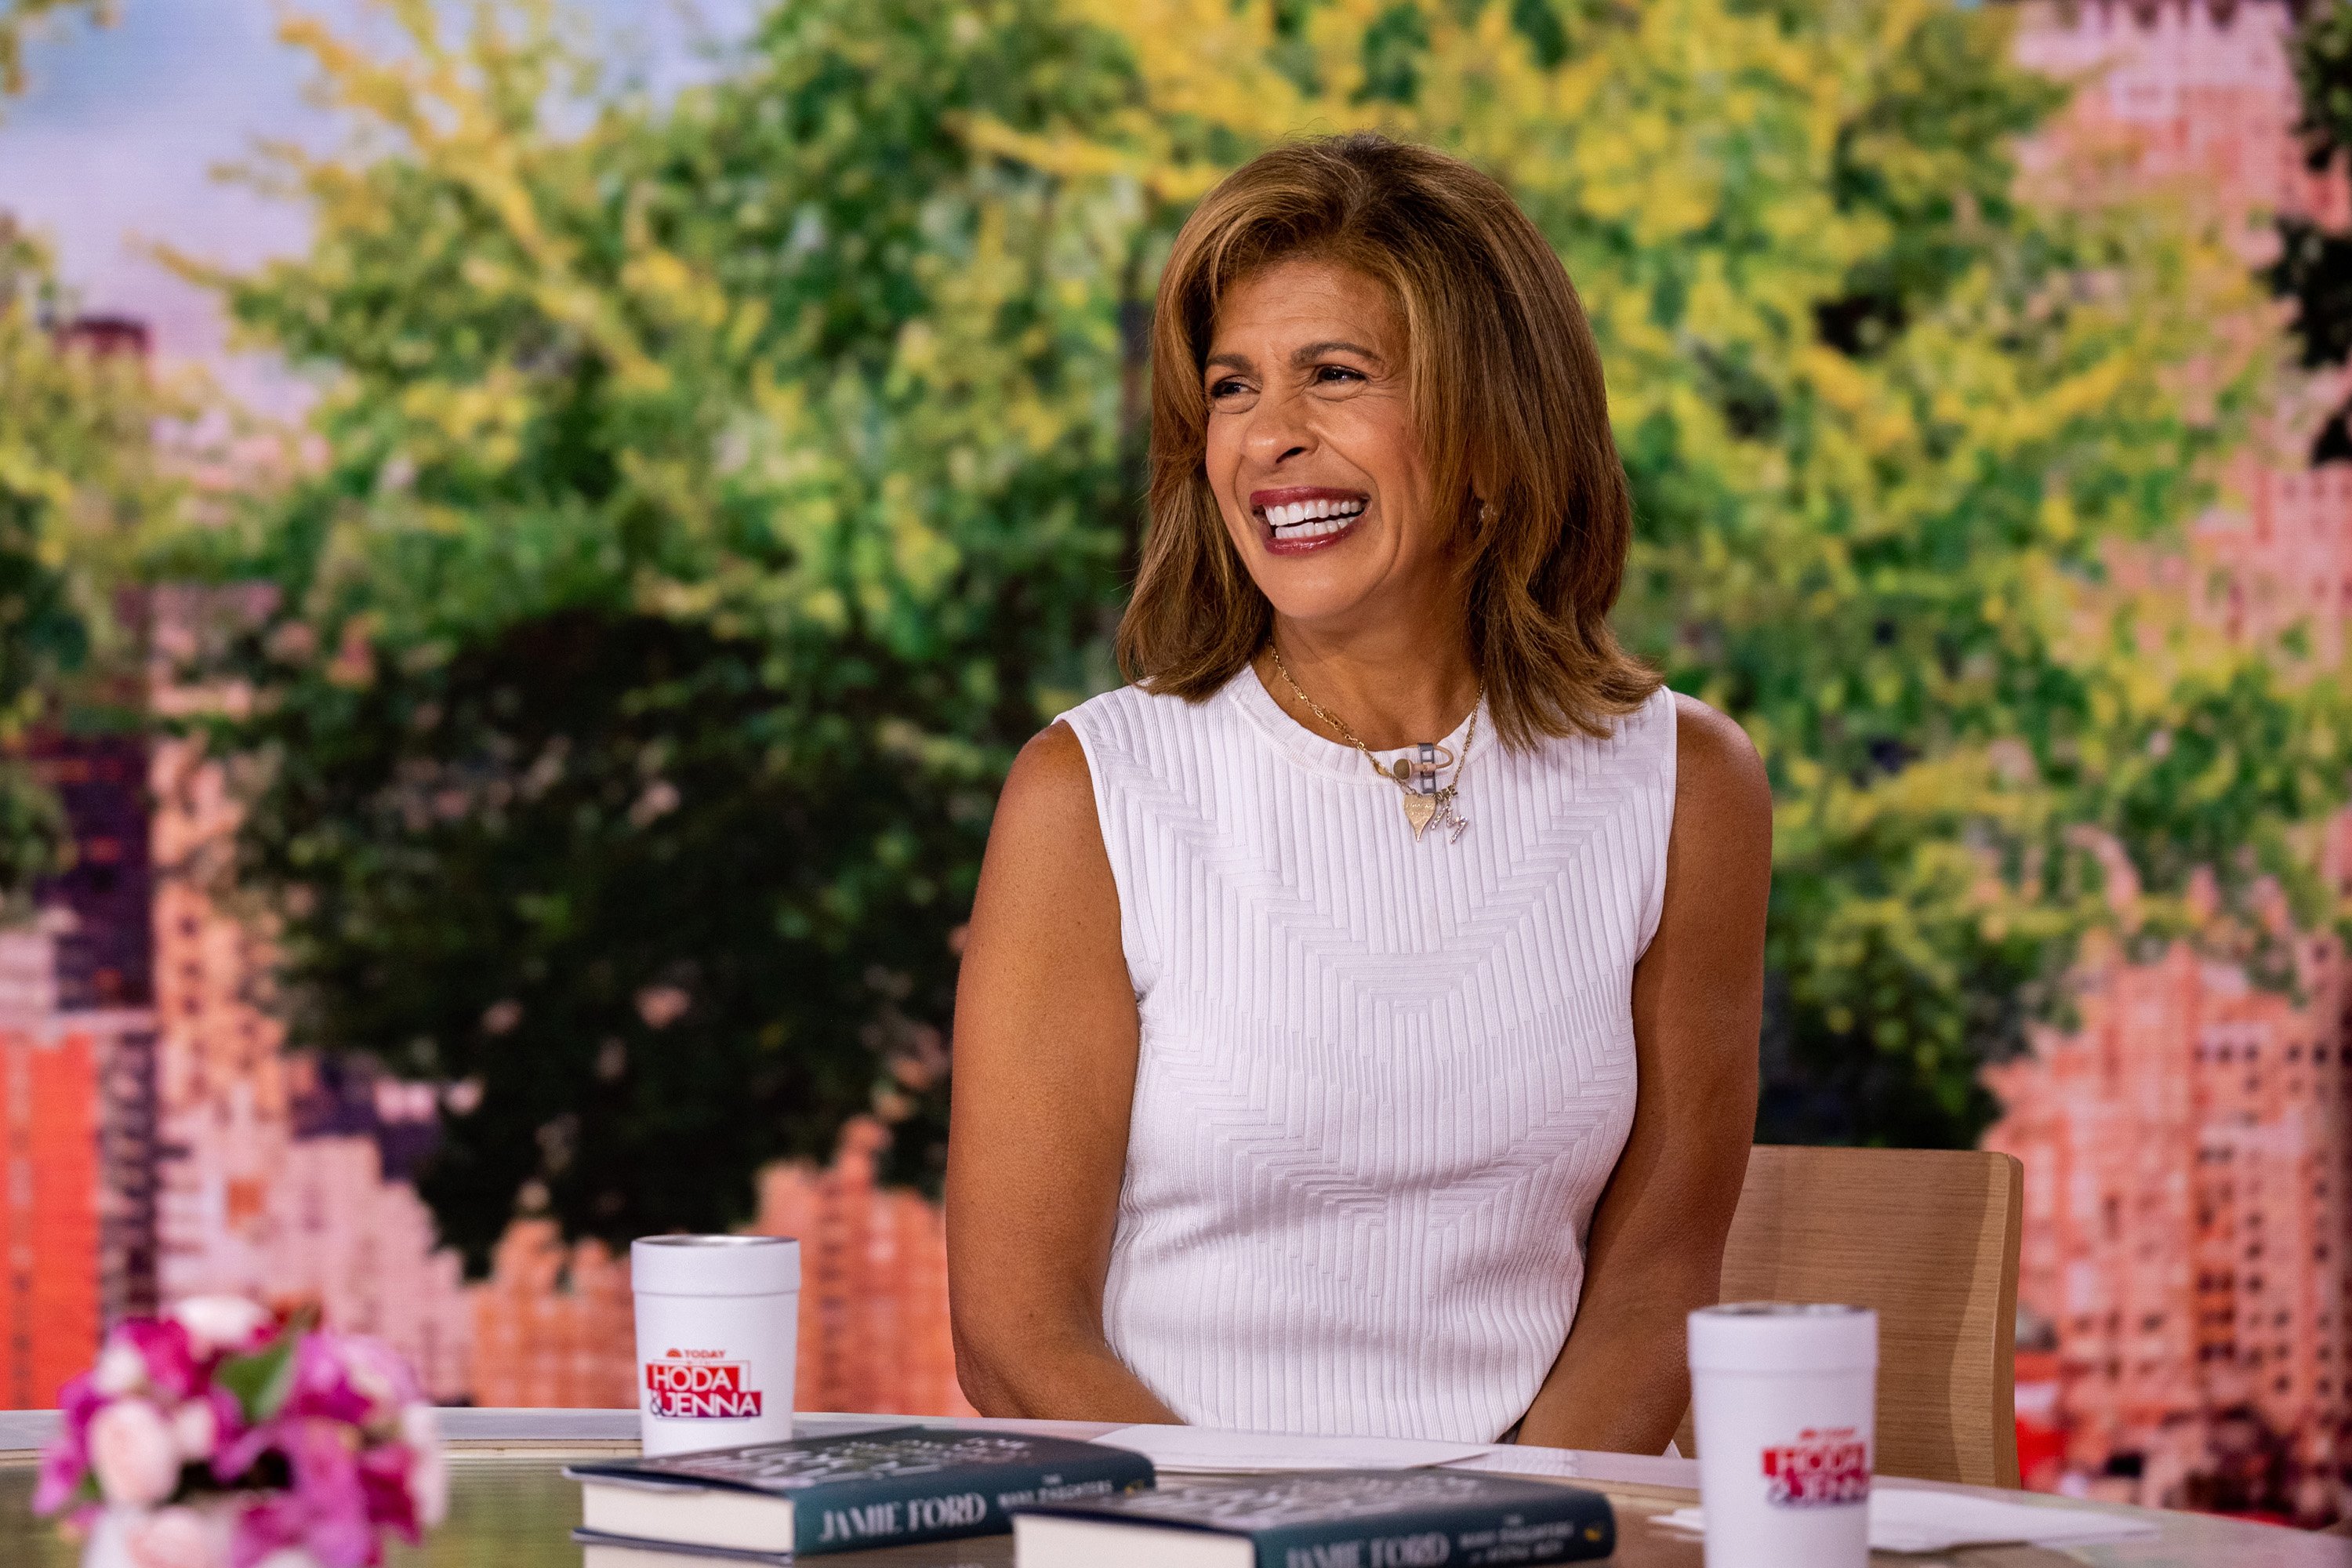 Hoda Kotb pictured on the "Today" show | Source: Getty Images